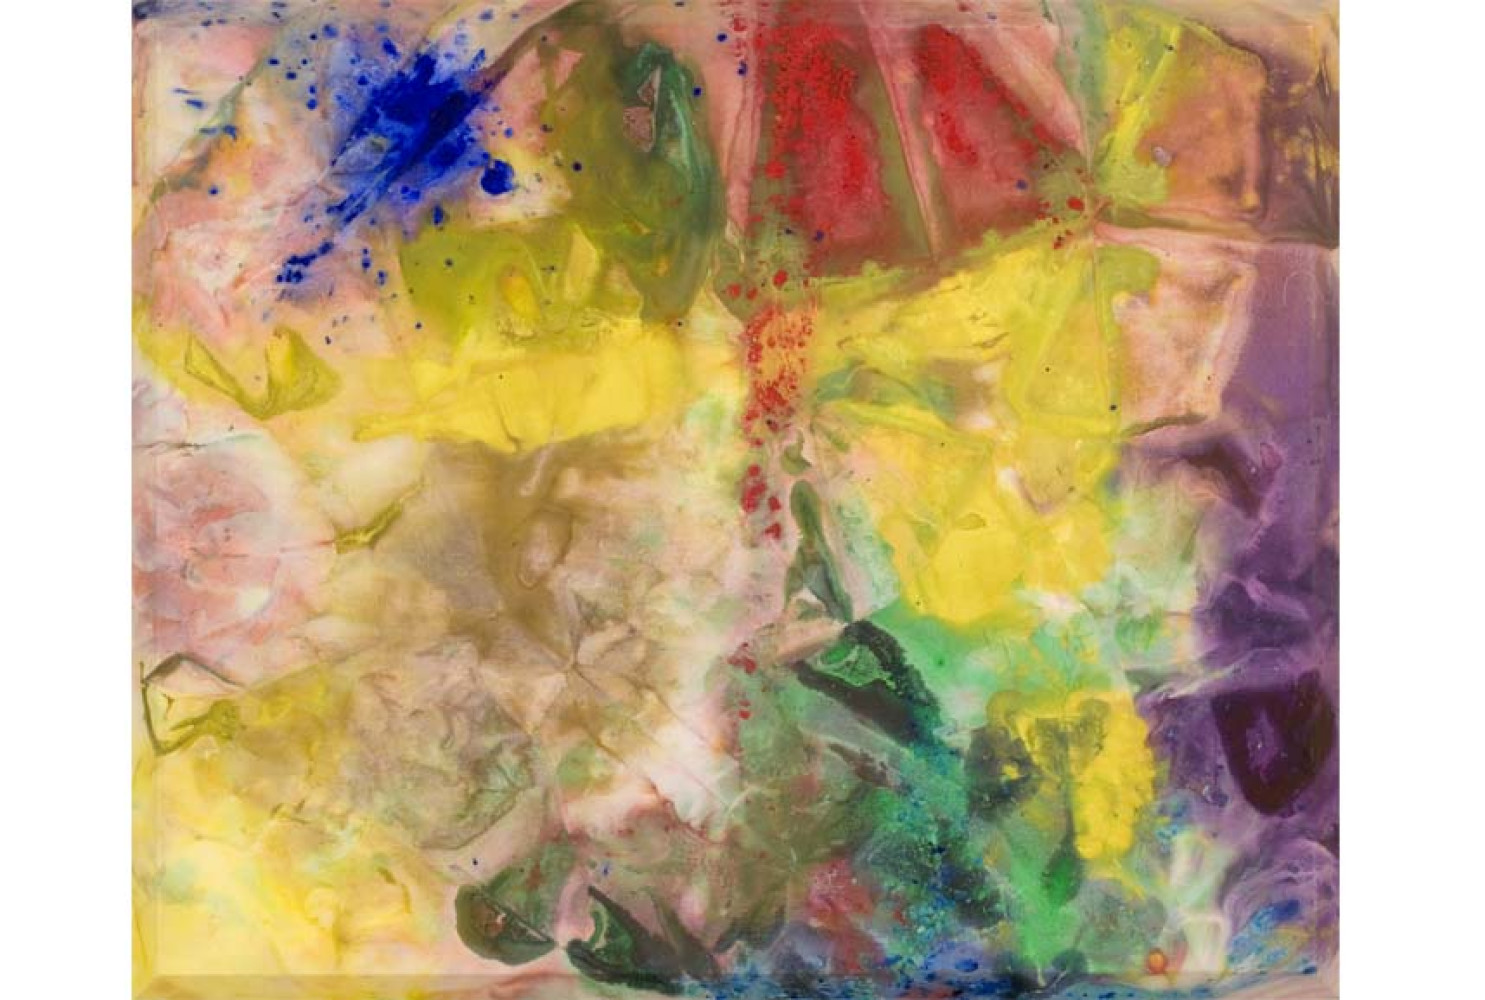 Zoo Again, 1972, by Sam Gilliam (American, b. 1933); Oil on raw canvas; 48 x 58 inches; Image © Sam Gilliam; Courtesy of Vibrant Vision Collection of Jonathan Green and Richard Weedman